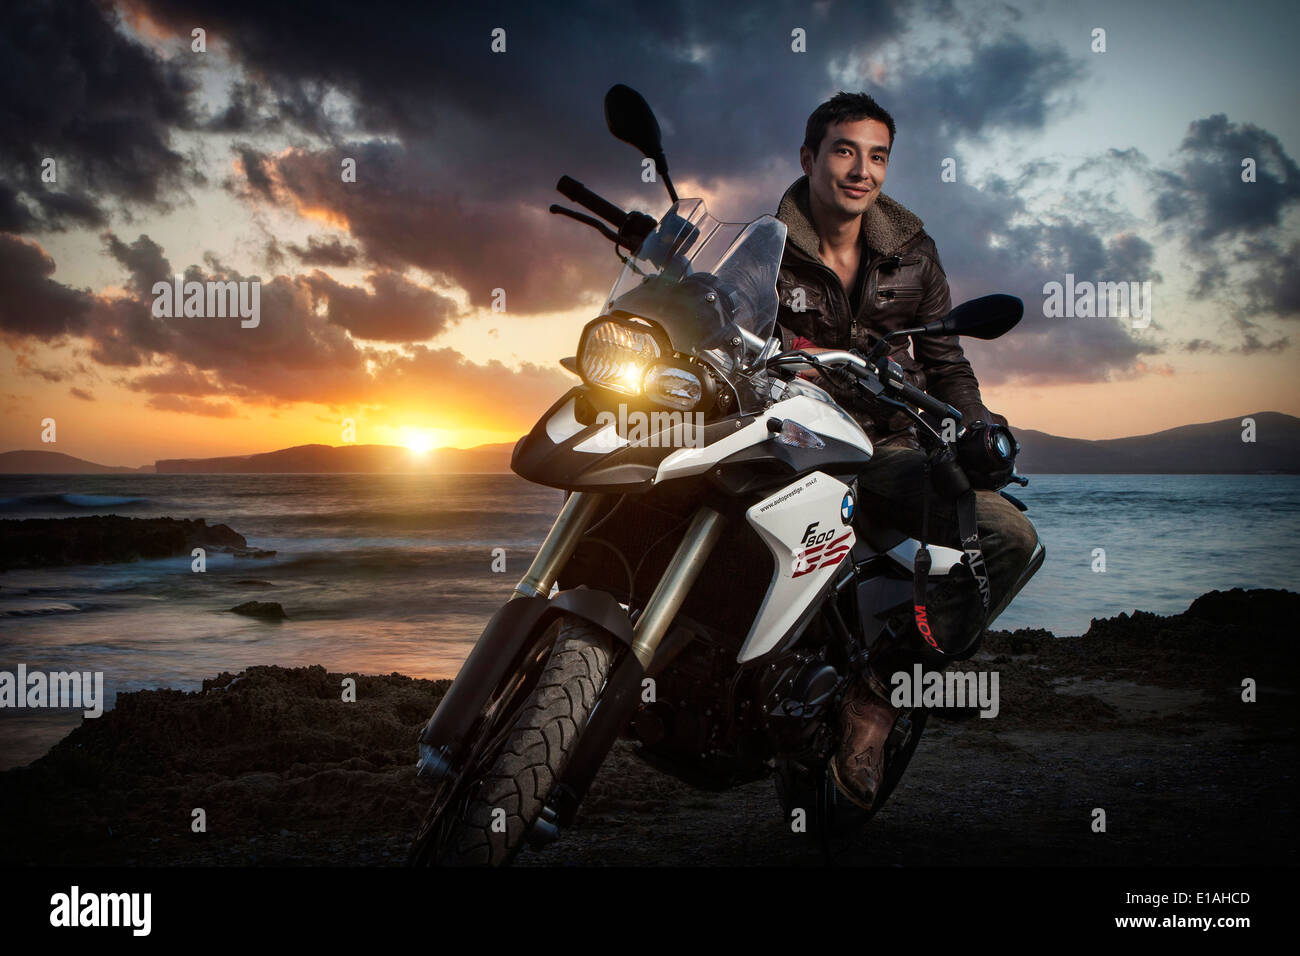 Portrait of a young man on a motorcycle Stock Photo